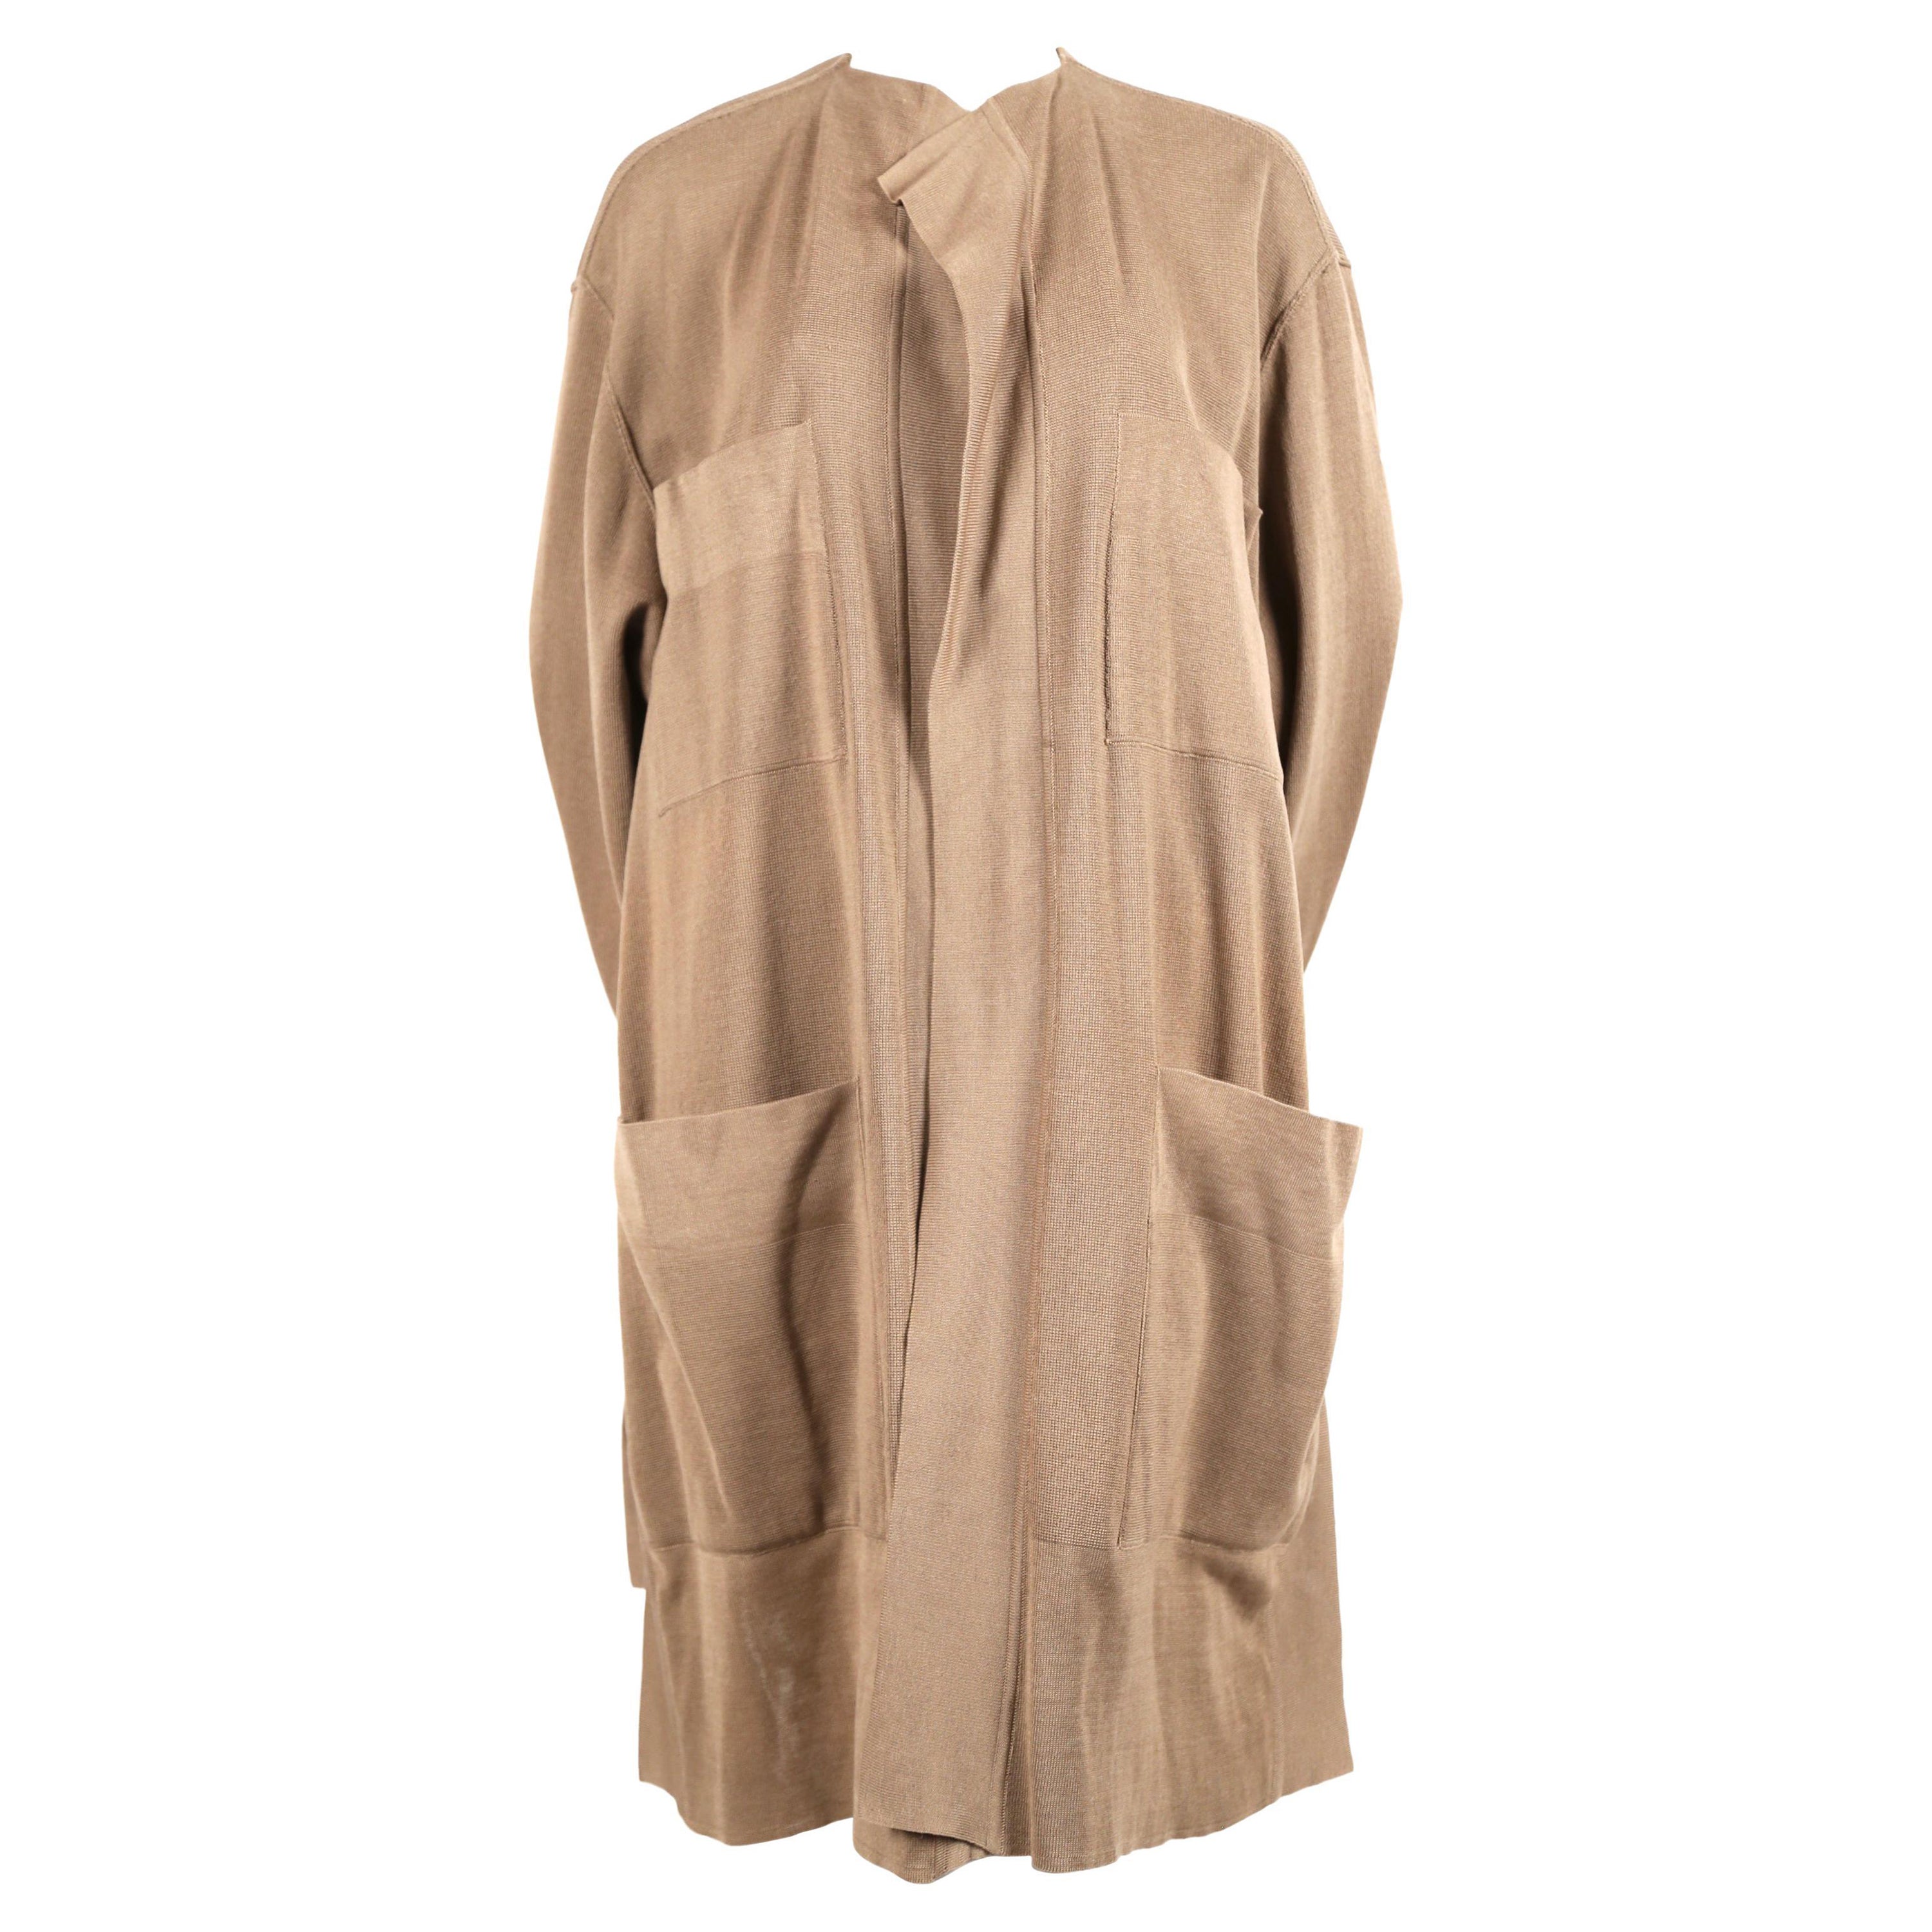 1985 AZZEDINE ALAIA oversized tan cardigan sweater coat with pockets For Sale